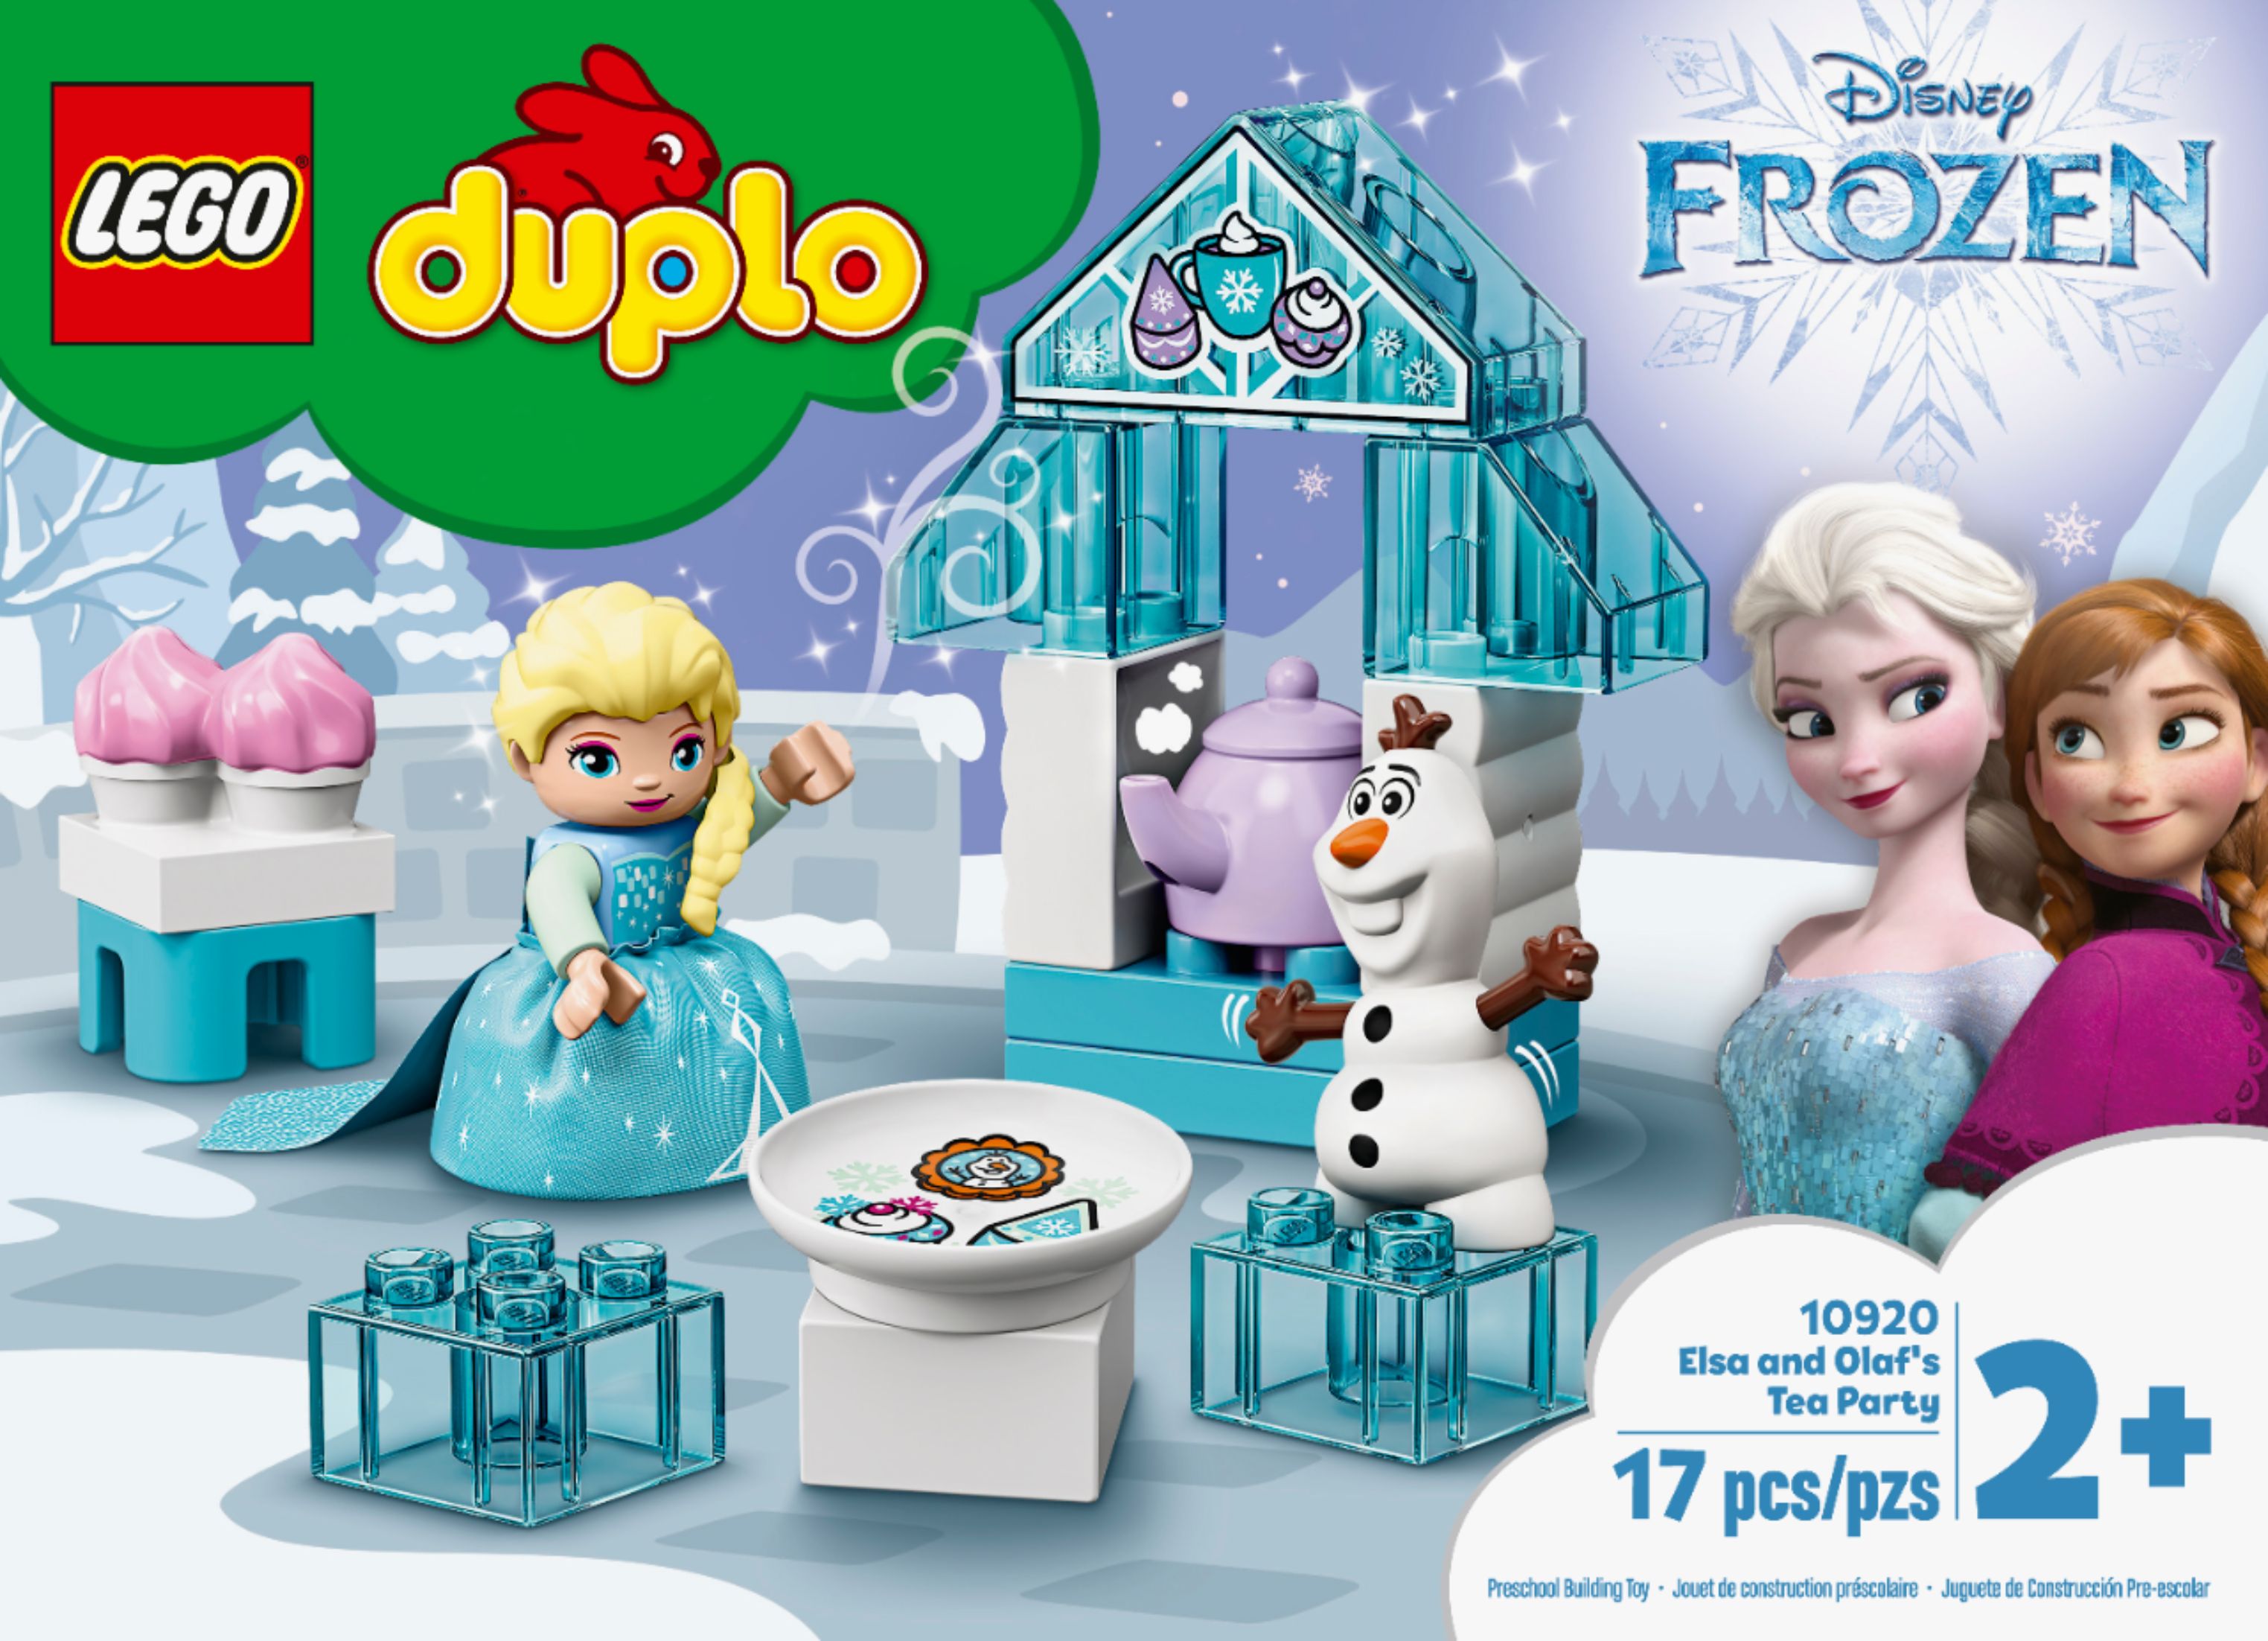 LEGO DUPLO Disney Frozen Toy Featuring Elsa and Olafs Tea Party 10920 Disney Frozen Gift for Kids and Toddlers New 2020 17 Pieces